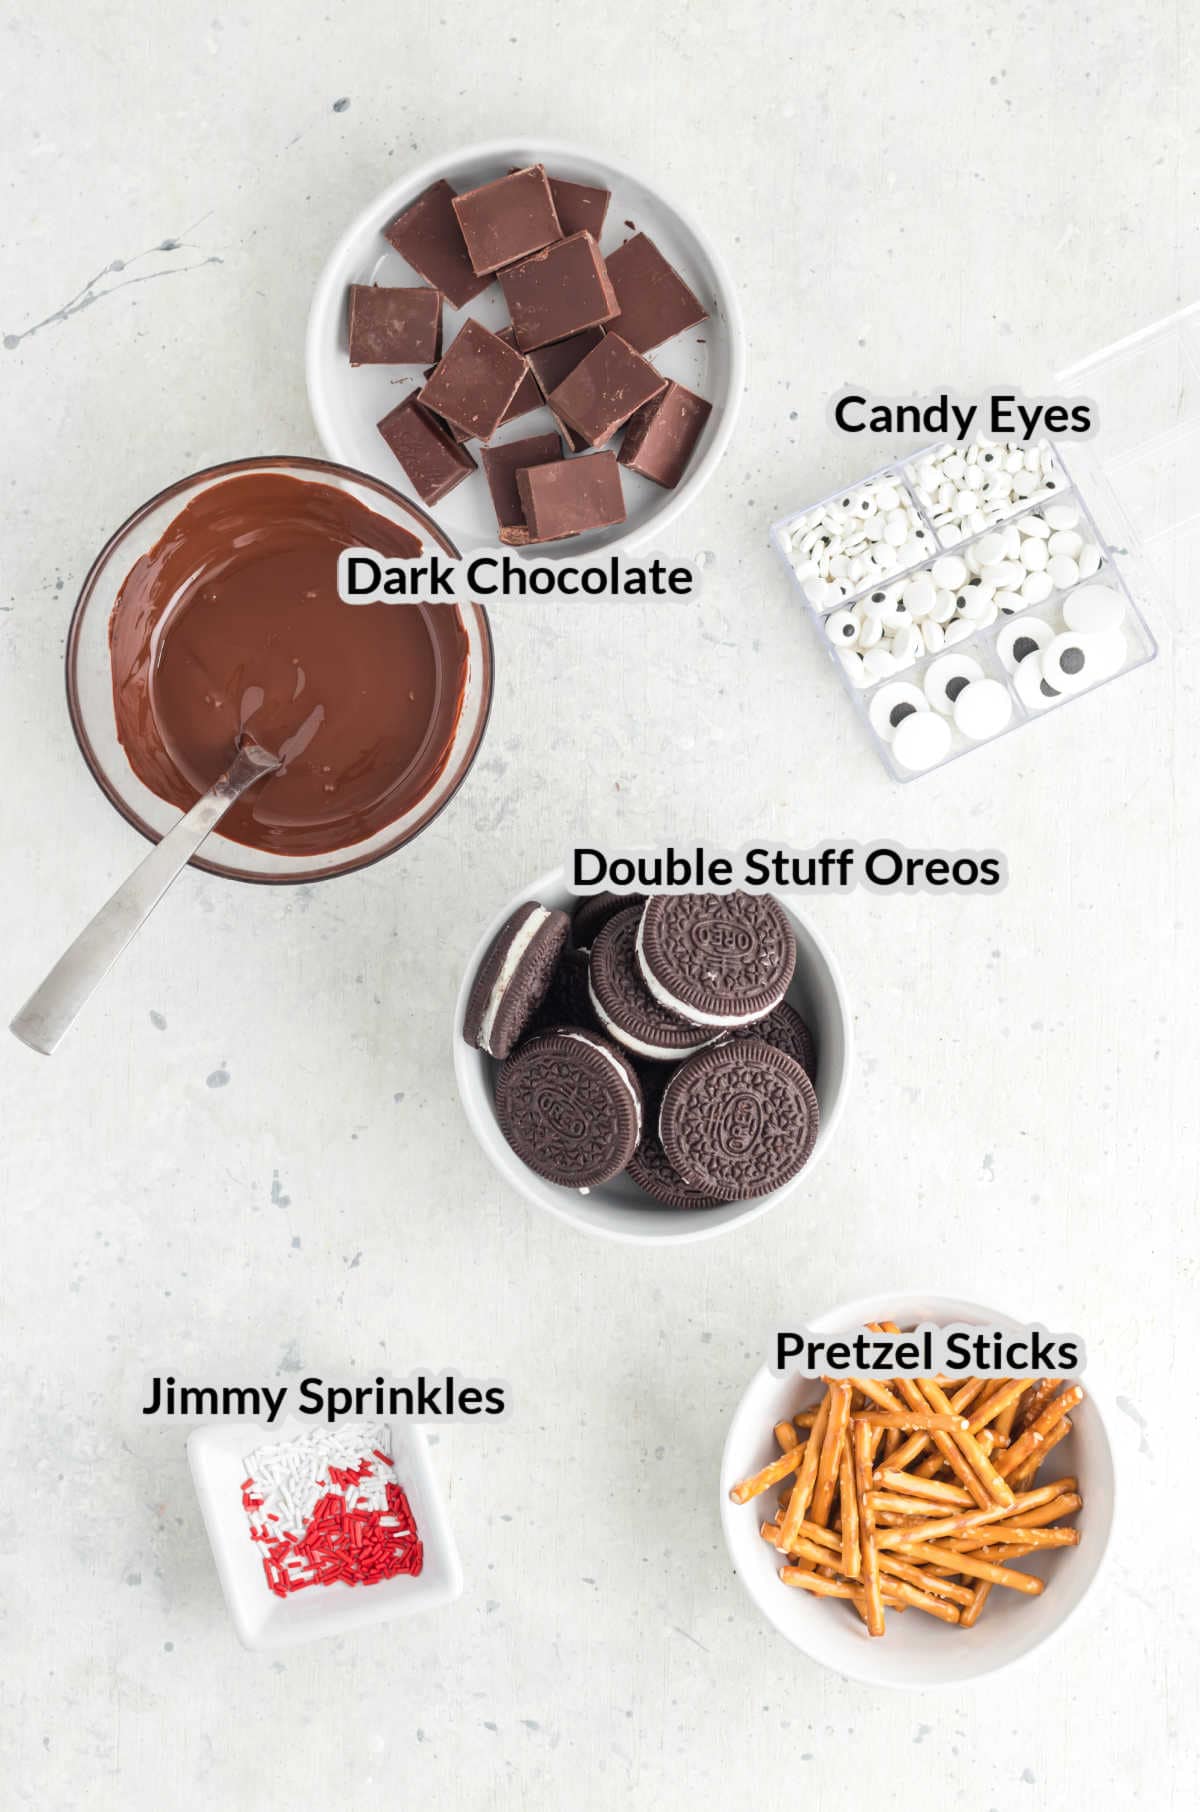 Overhead Image of the Oreo Spiders Ingredients